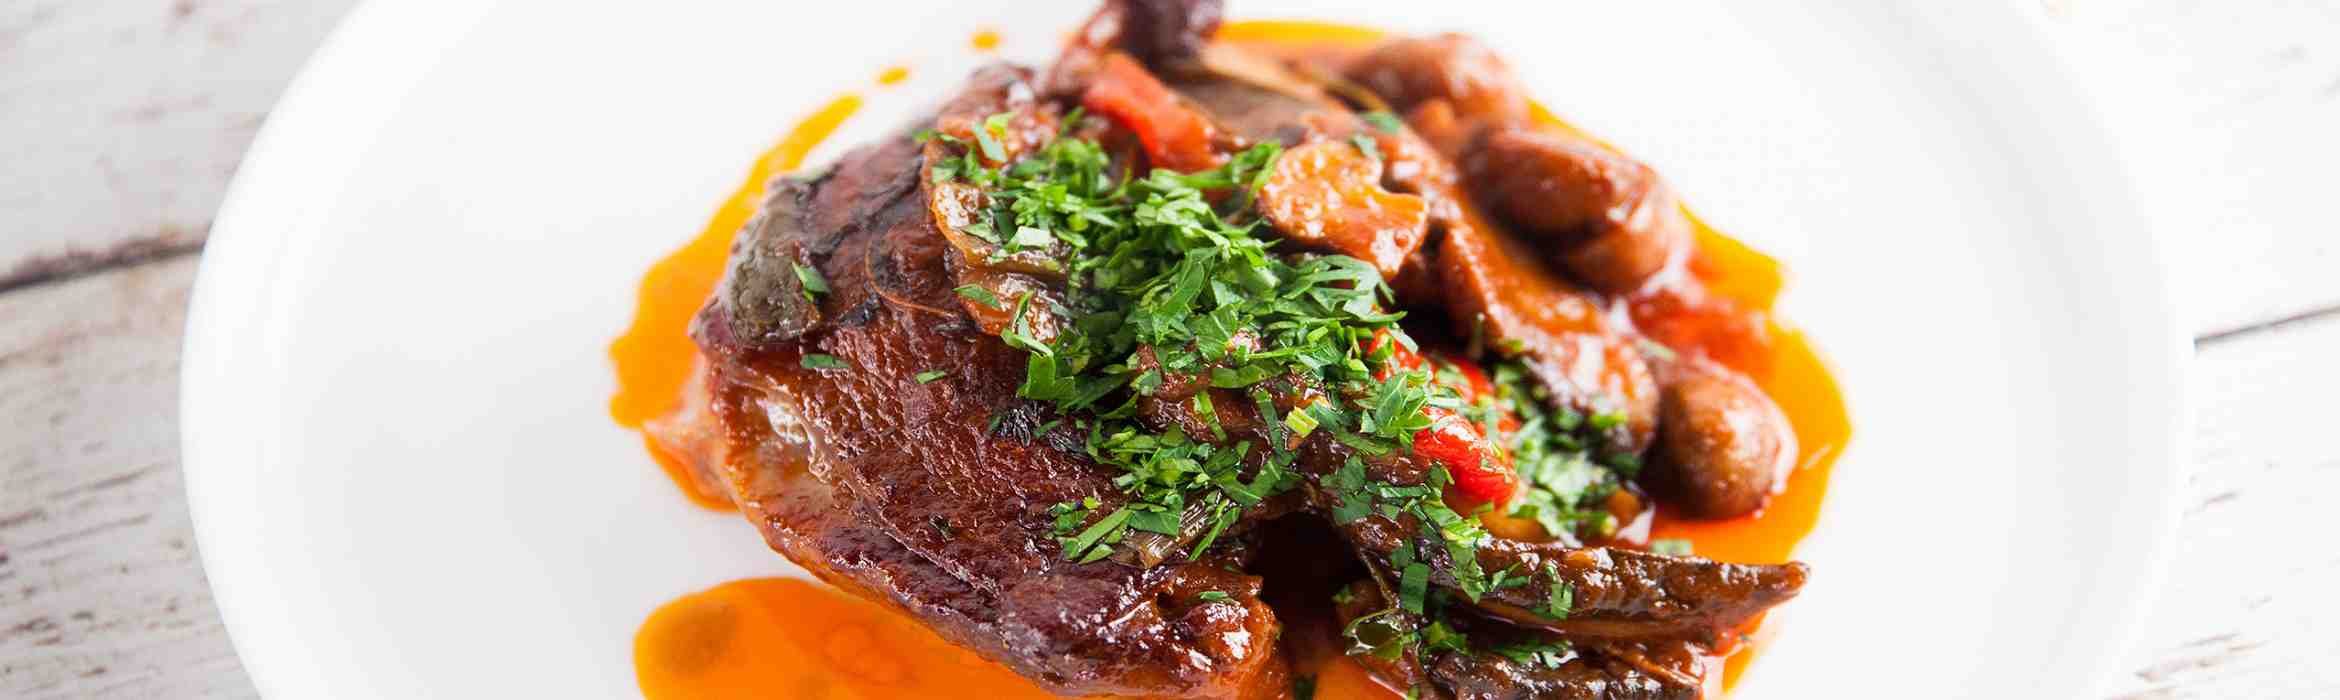 Slow Cooked Duck Legs with Mushrooms & Red Wine Recipe